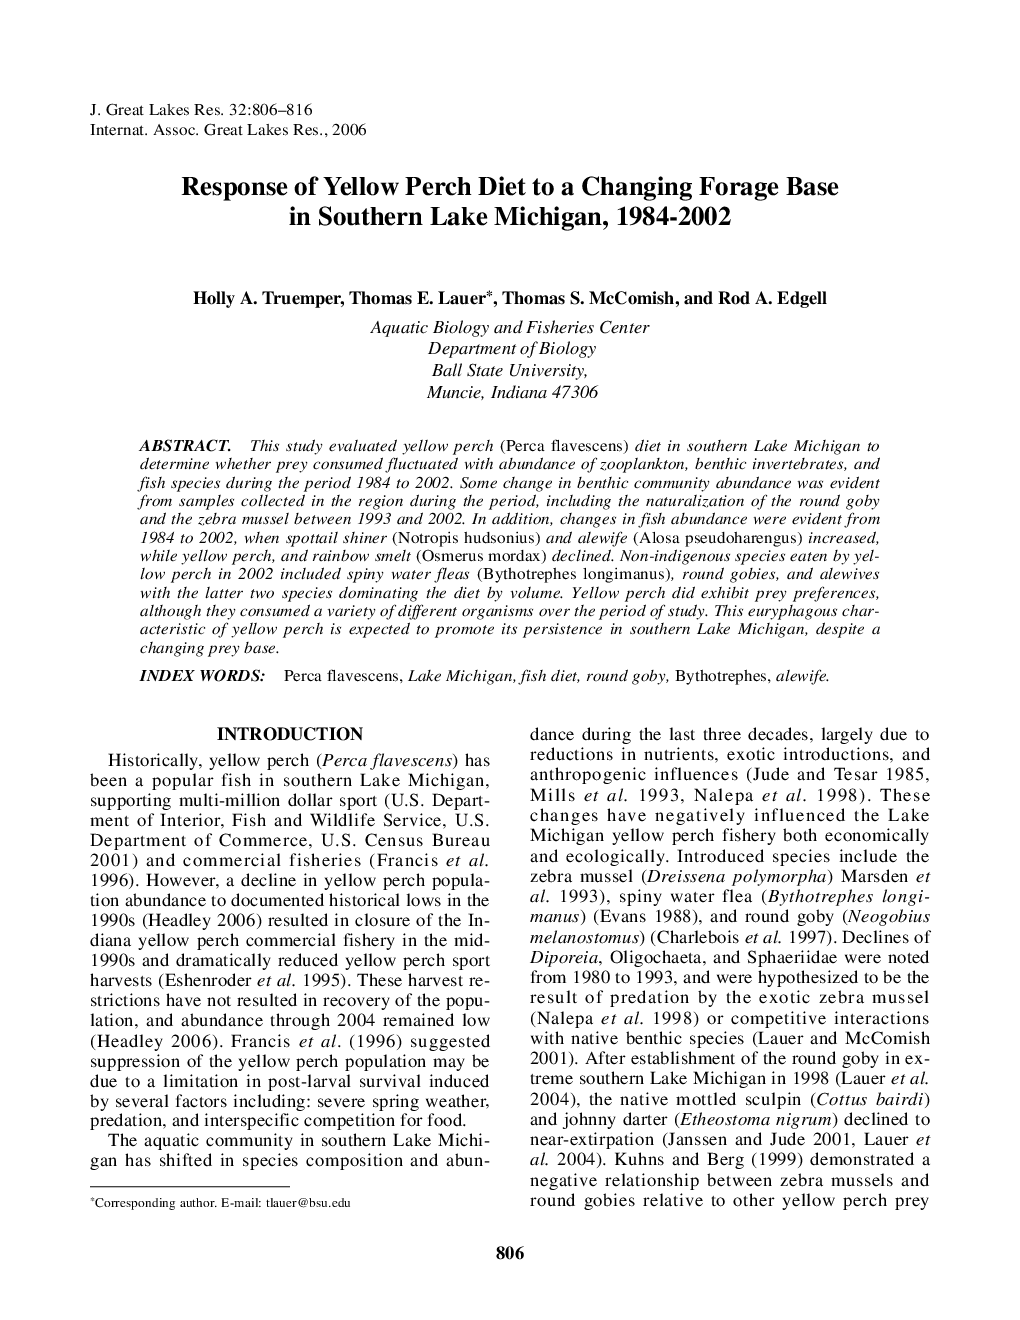 Response of Yellow Perch Diet to a Changing Forage Base in Southern Lake Michigan, 1984-2002